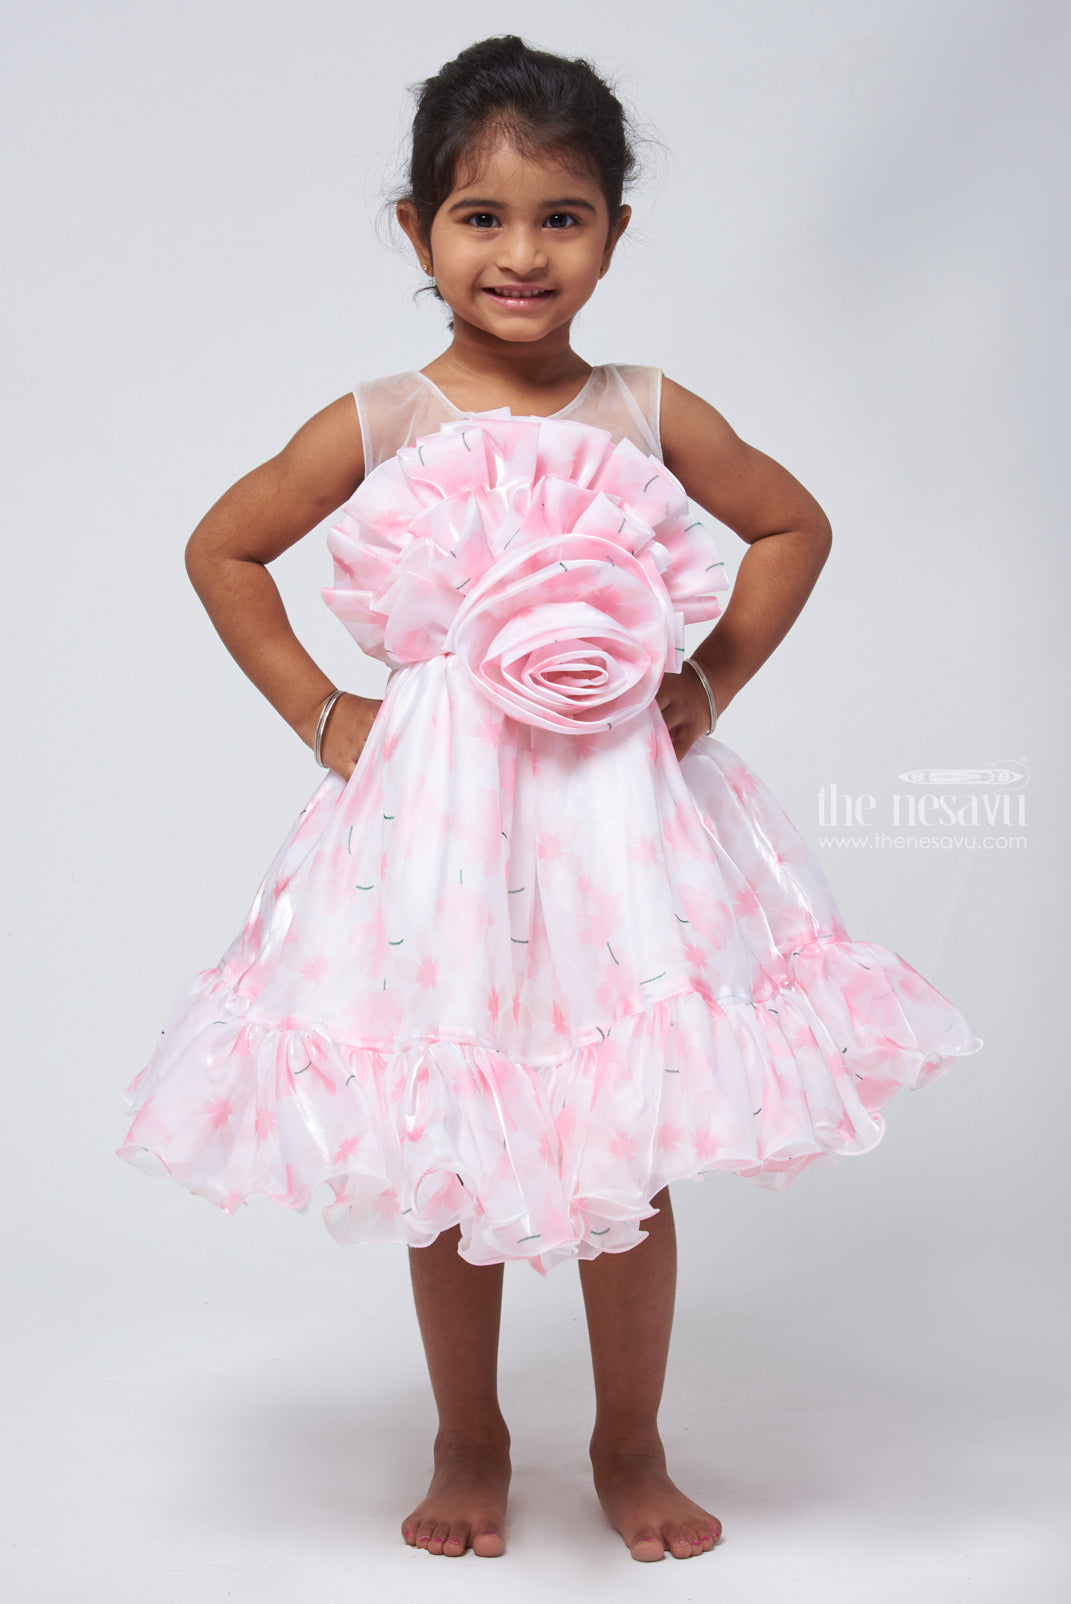 The Nesavu Party Frock Designer Pink Organza Party Dress: Floral Bow & Flared Detail for Young Girls Nesavu 16 (1Y) / Pink PF125A-16 Floral Designer Party Wear for Girls | Organza Dresses for Little Girls | The Nesavu